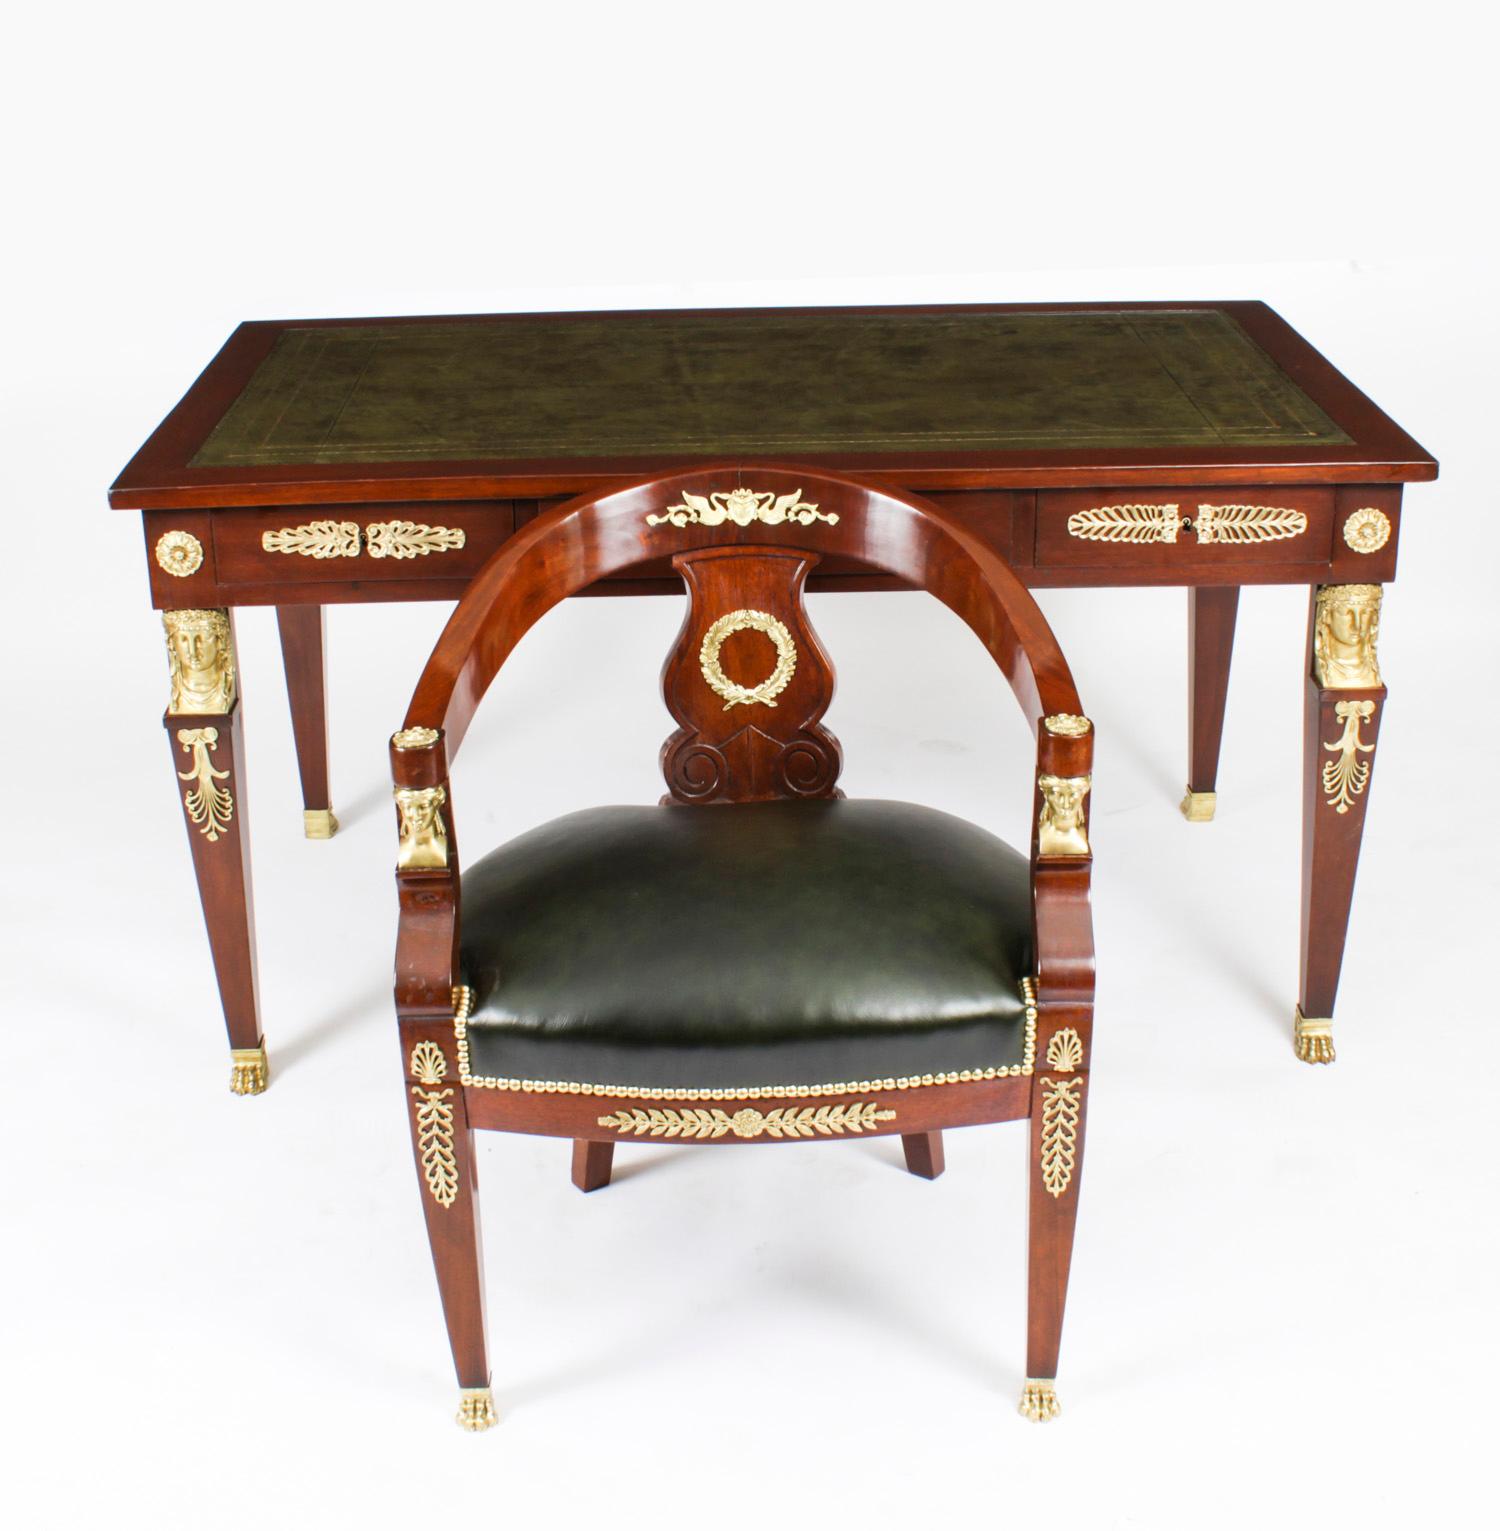 This is a fine antique French gilt-bronze mounted mahogany Empire bureau plat complete with it's original desk chair, Circa 1860 in date.
 
The rectangular top is fitted with a green gold-tooled inset leather writing surface, the frieze with three